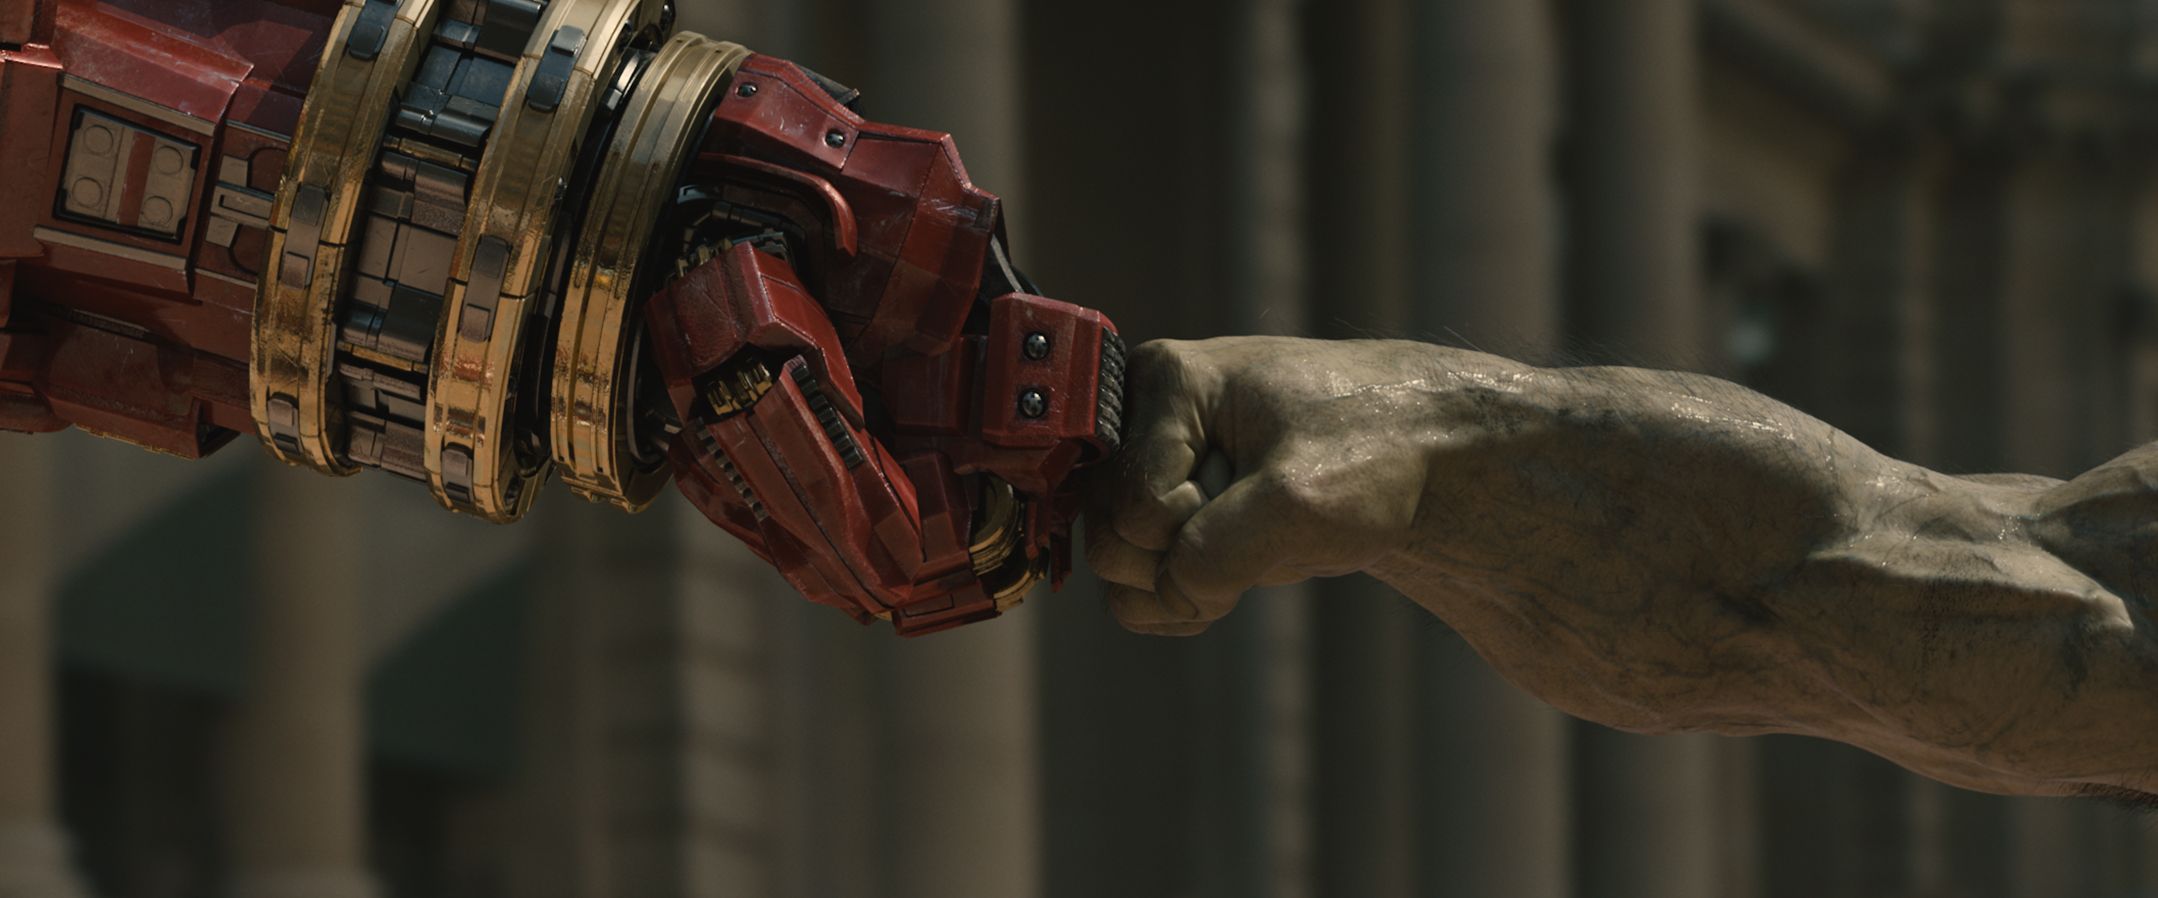 The Avengers Age of Ultron Photo 3